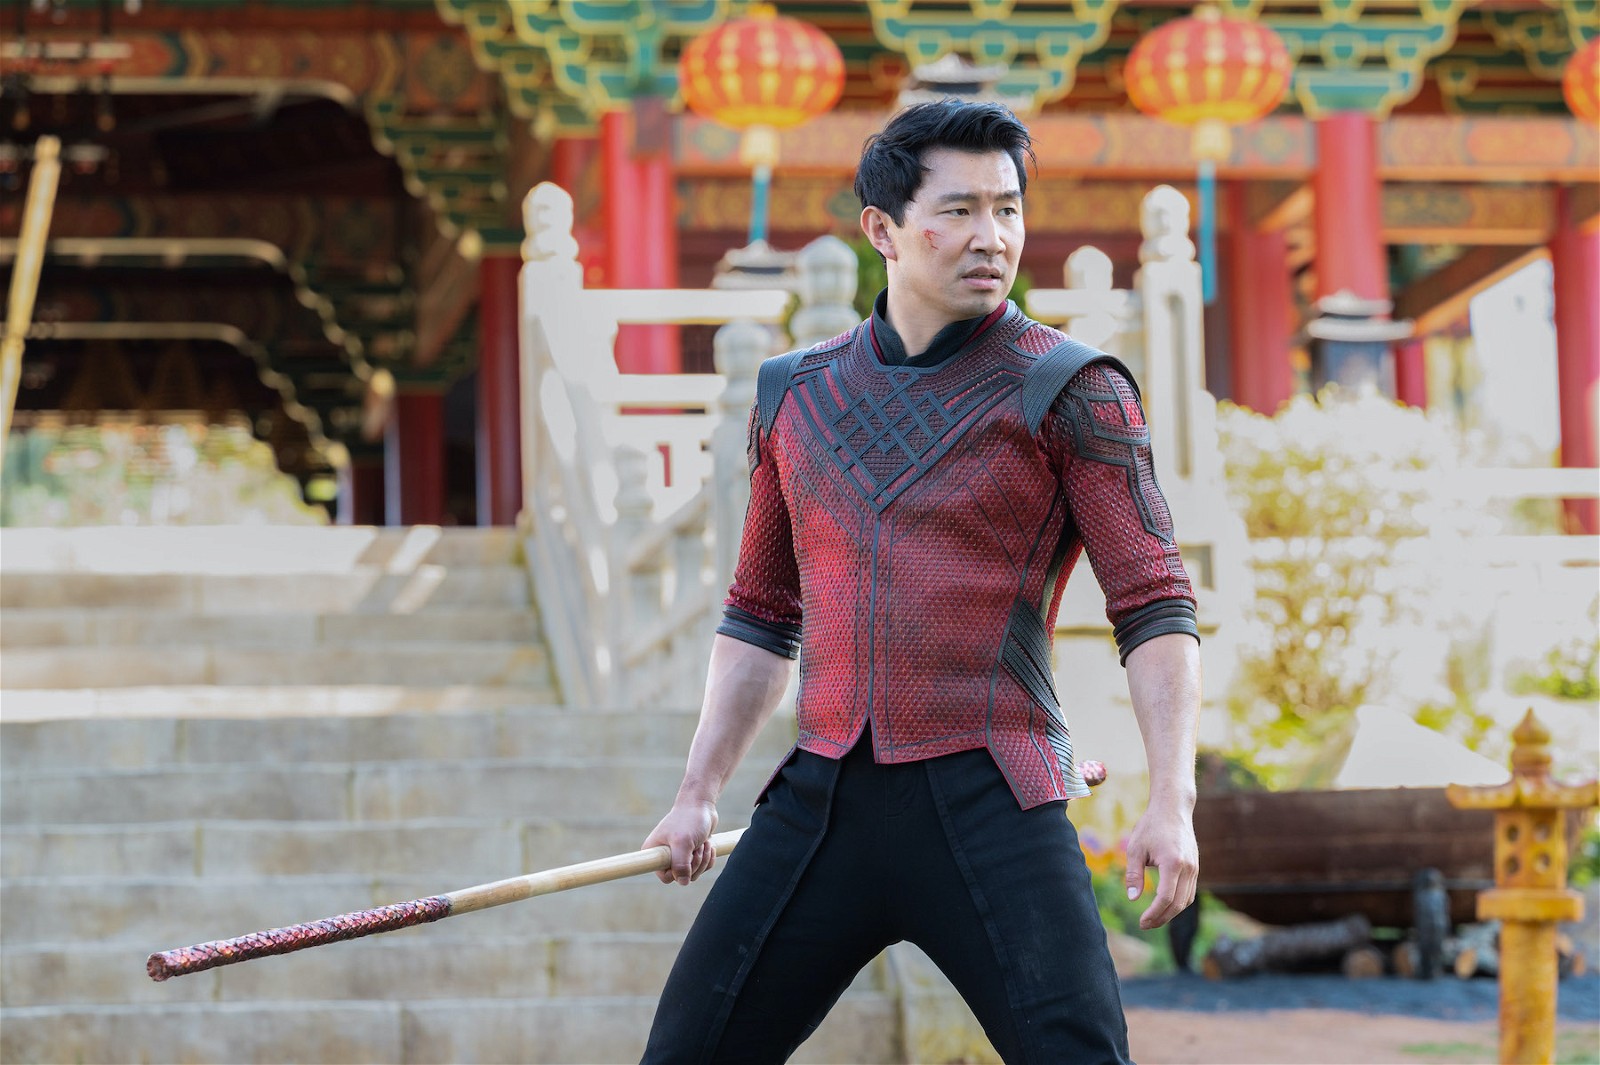 A still from Shang-Chi and the Legends of the Ten Rings